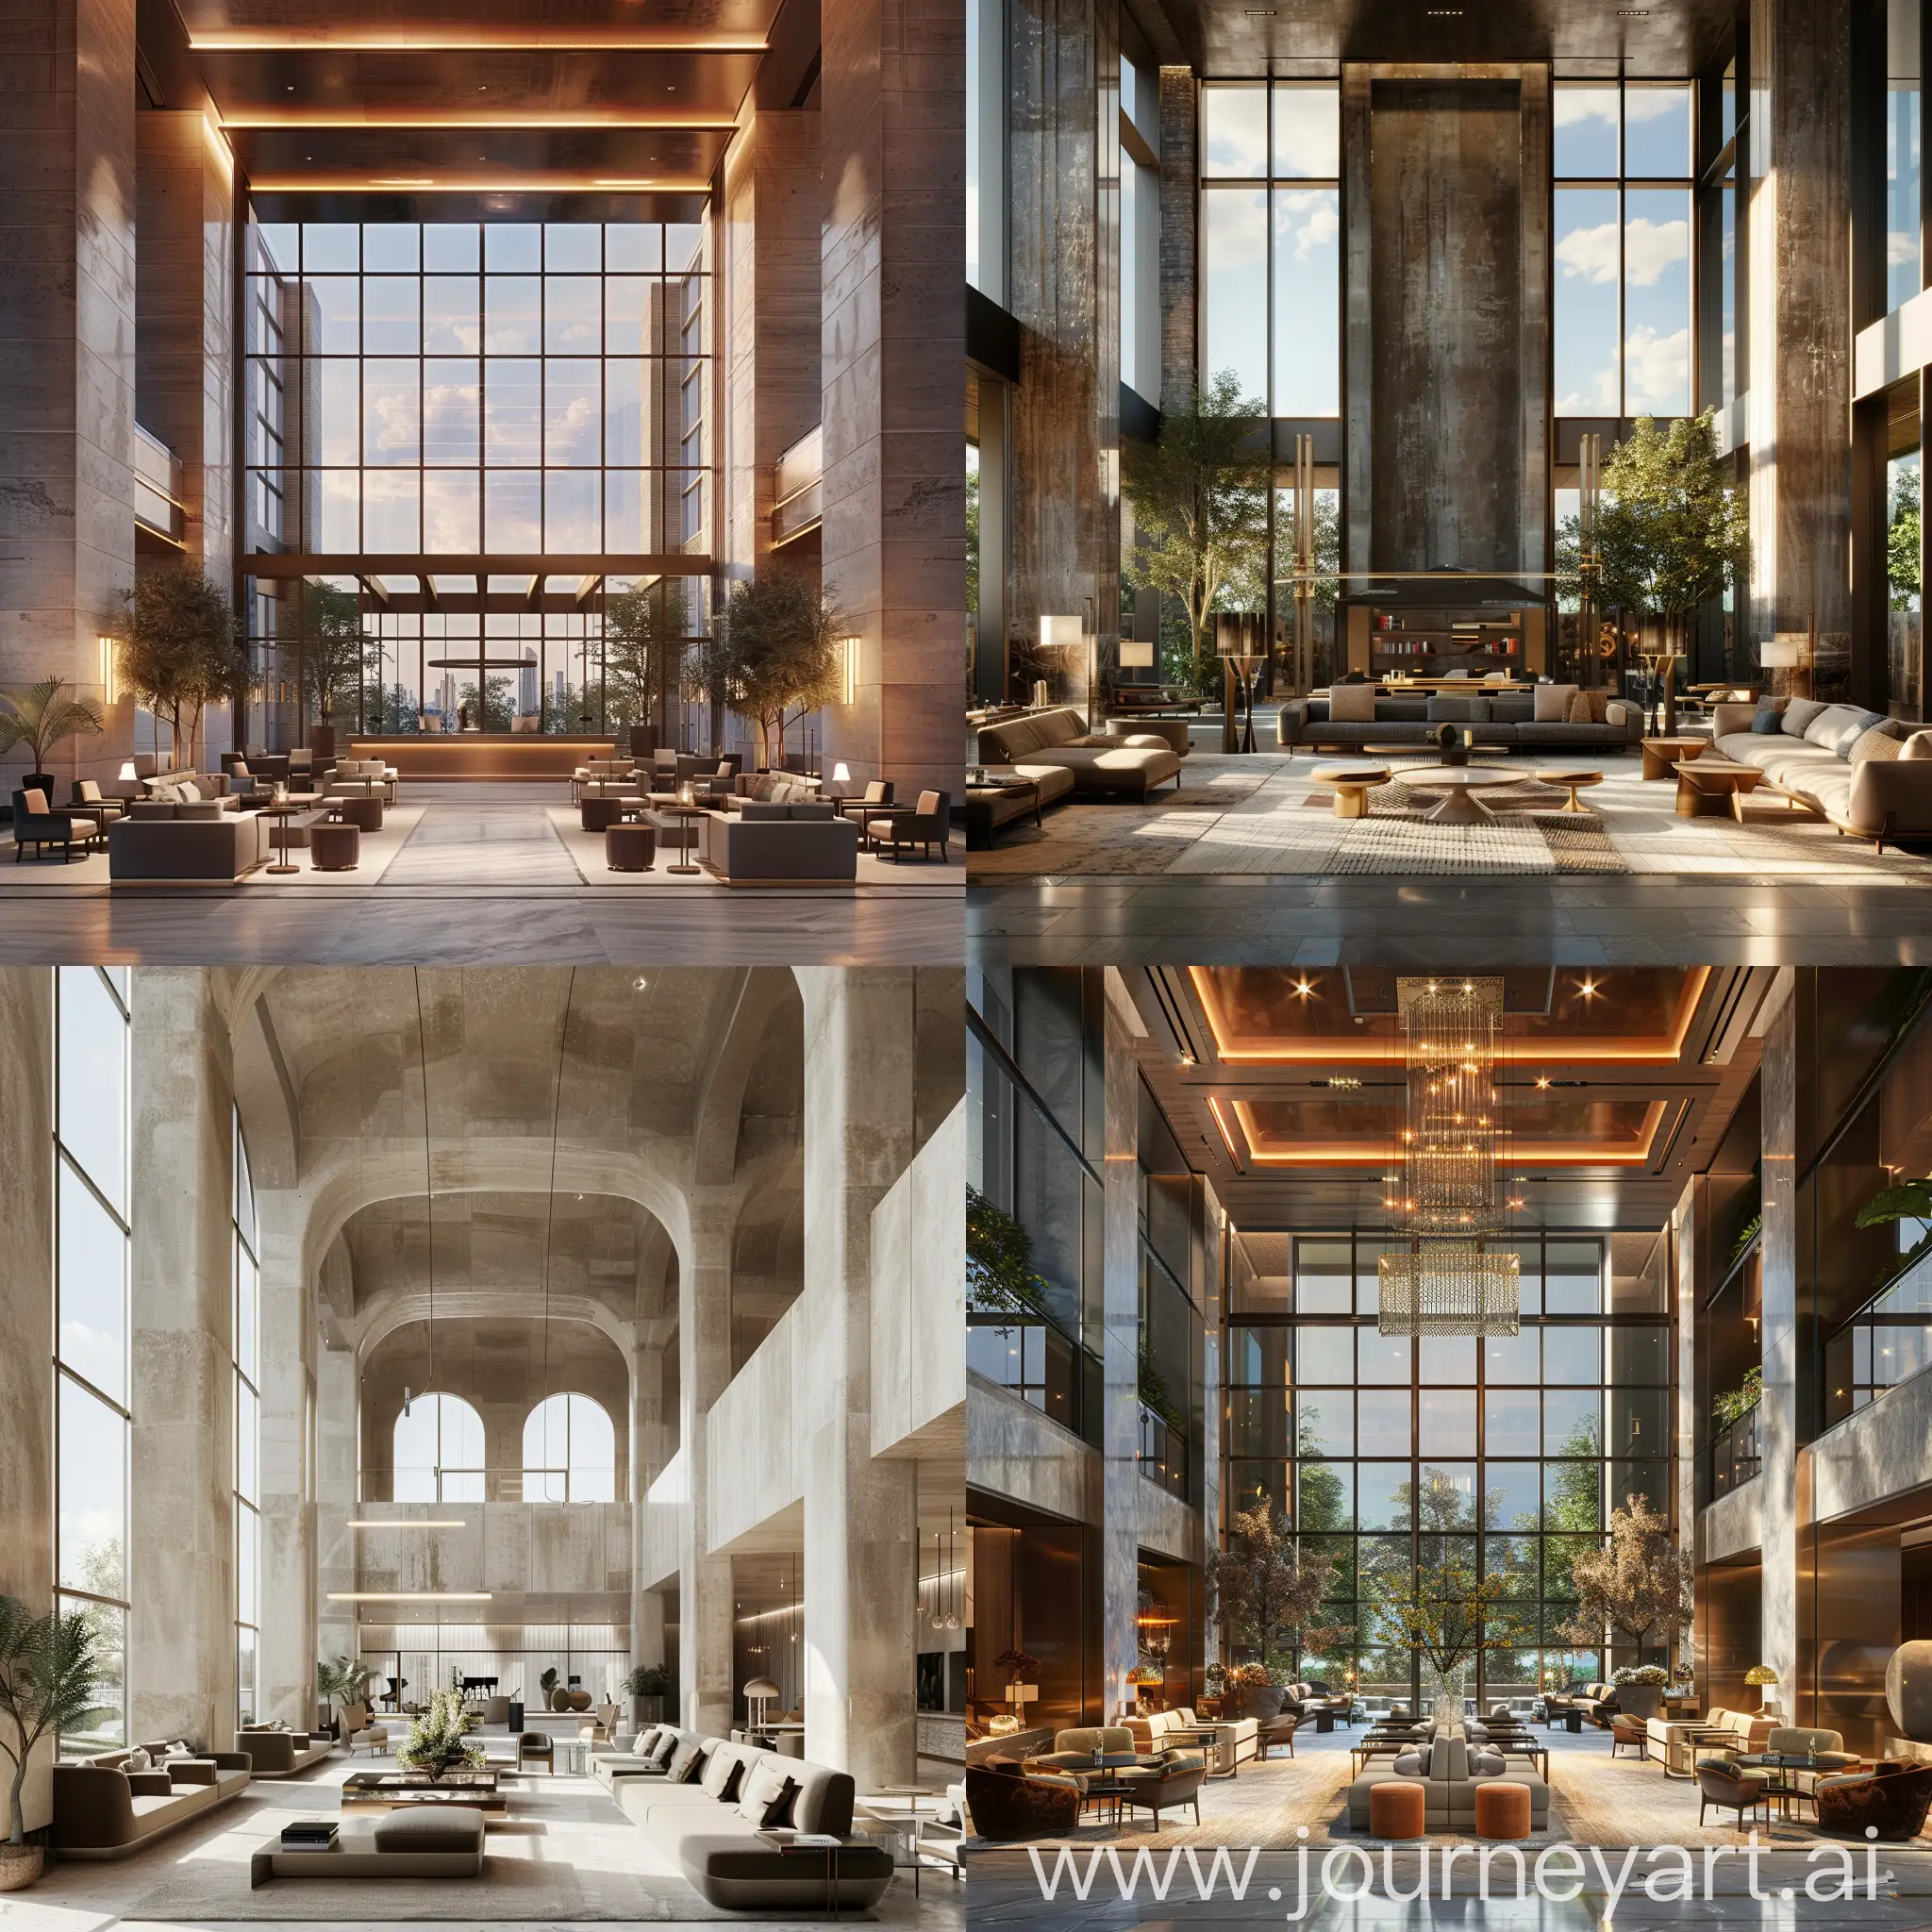 Neo-cosmic hotel lobby, double length floor to celling windows, high celings, inspiared by central park penthouse arcitecture